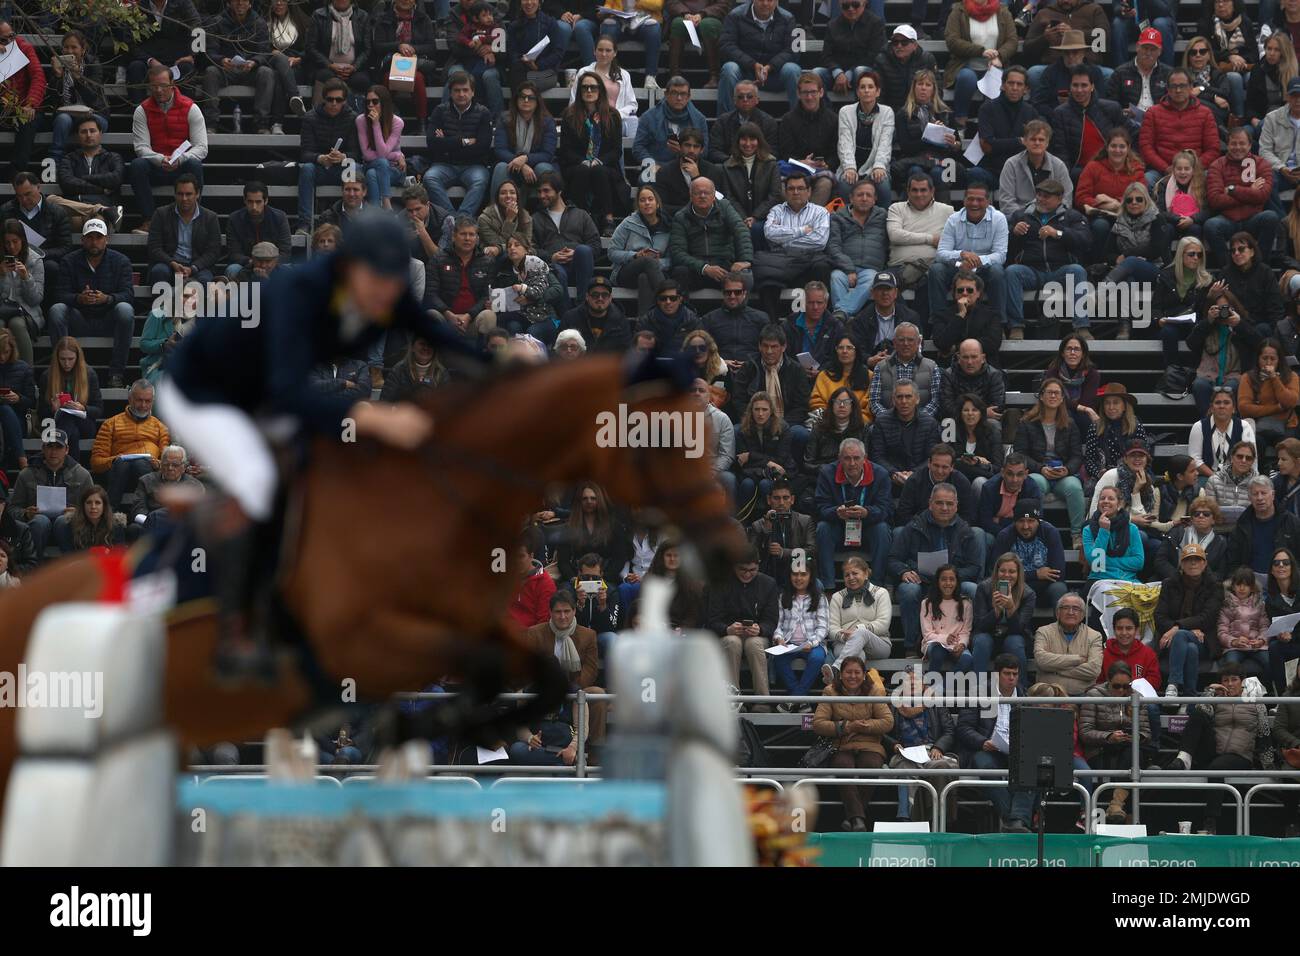 Spectators watch as Colomibas Rodrigo Diaz on his horse Alonzo D Ete takes a jump in the first classification round of individual and team equestrian jumping at the Pan American Games in